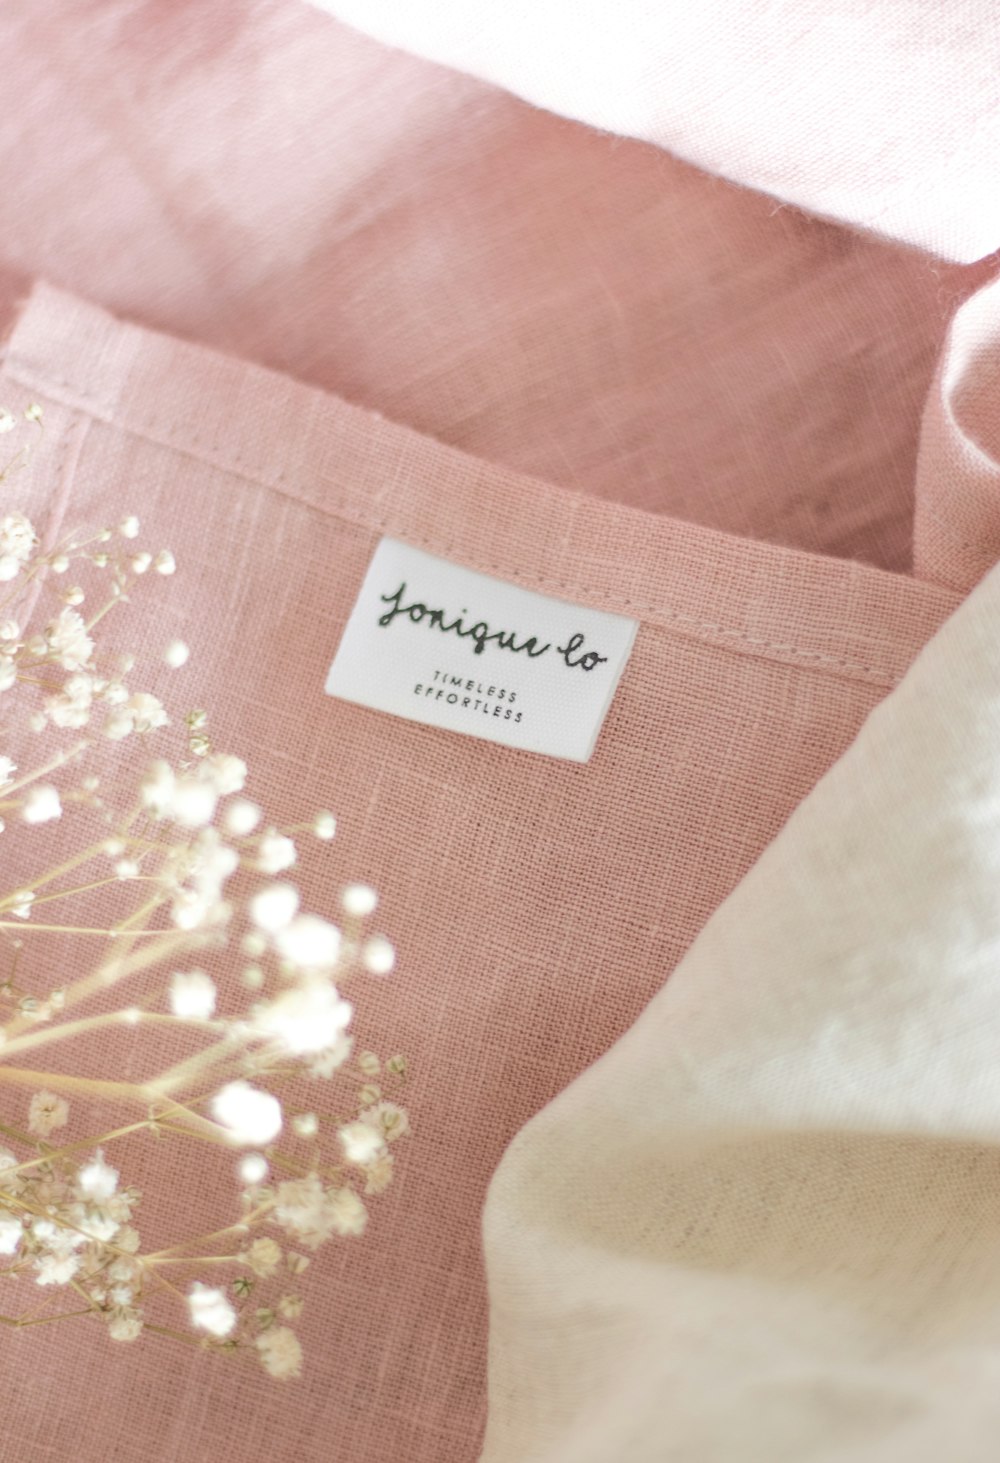 a close up of a pillow with a label on it